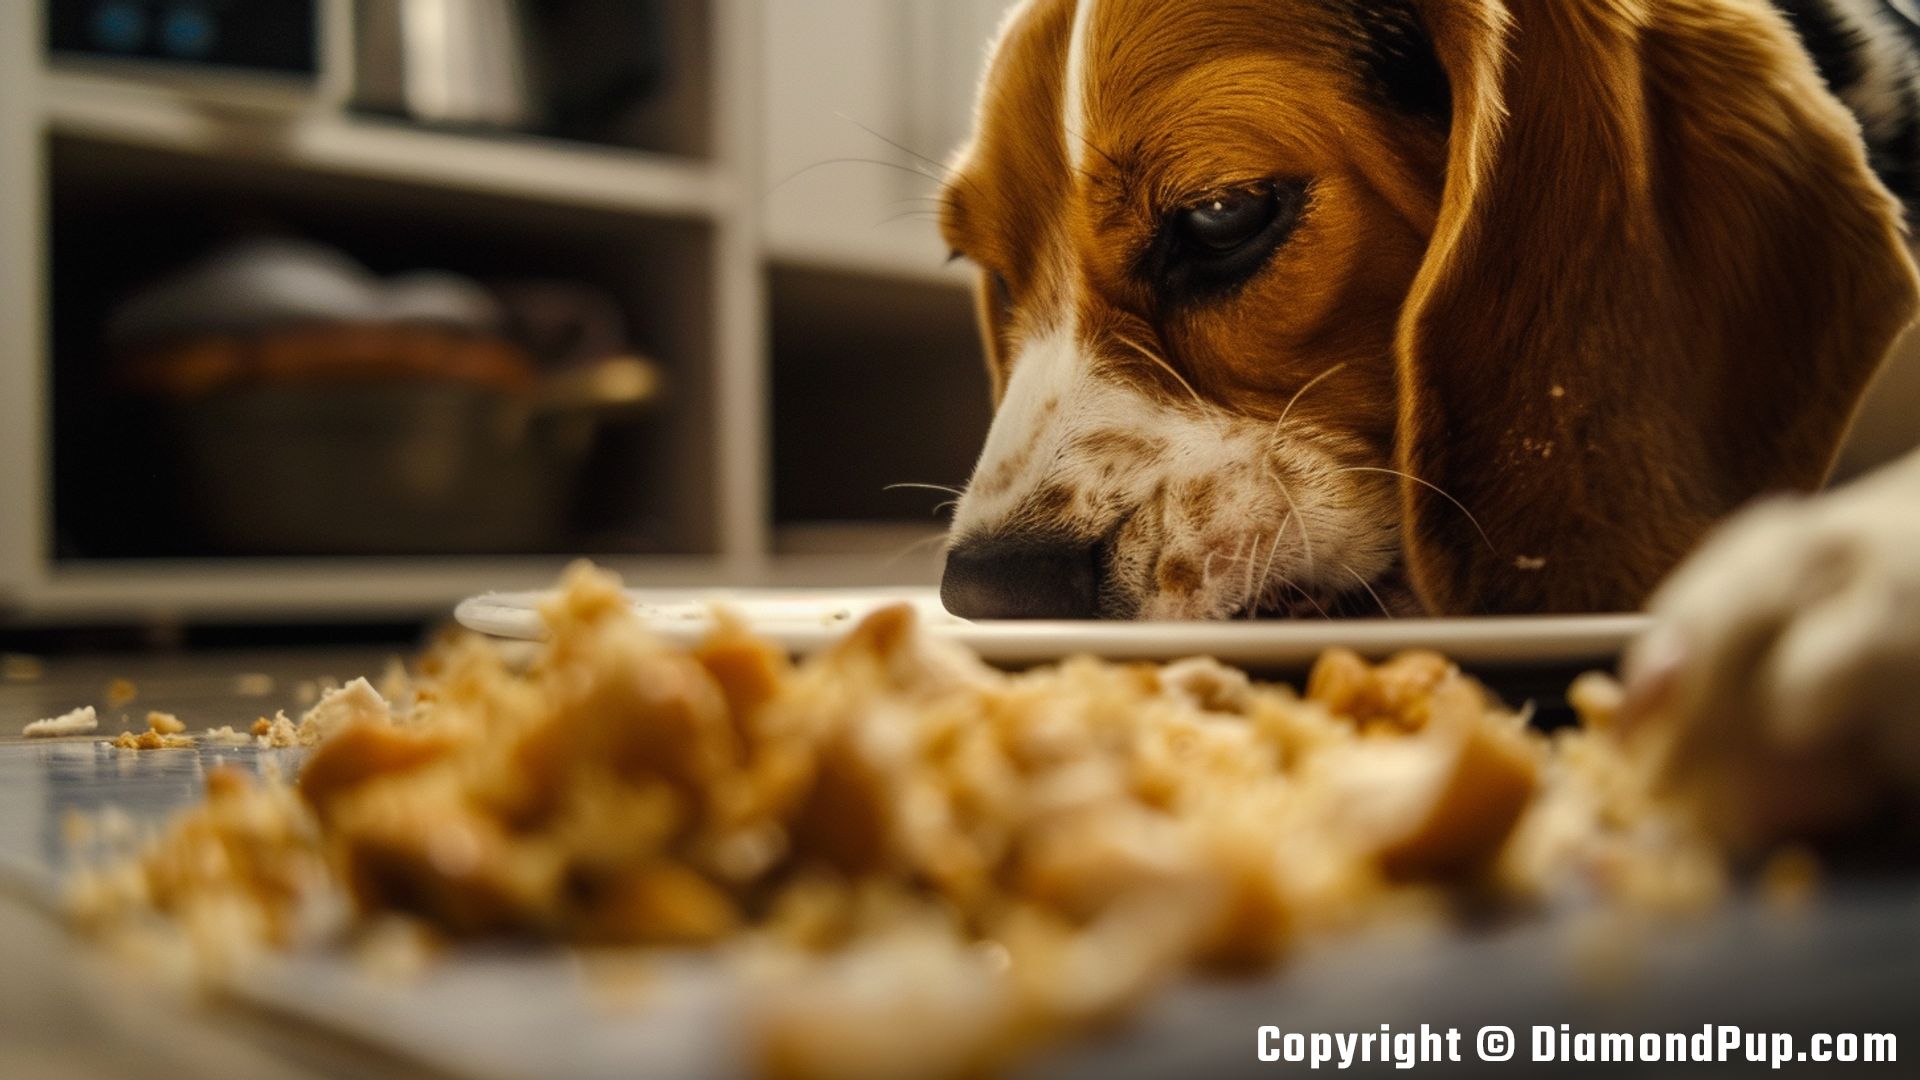 Image of an Adorable Beagle Snacking on Chicken